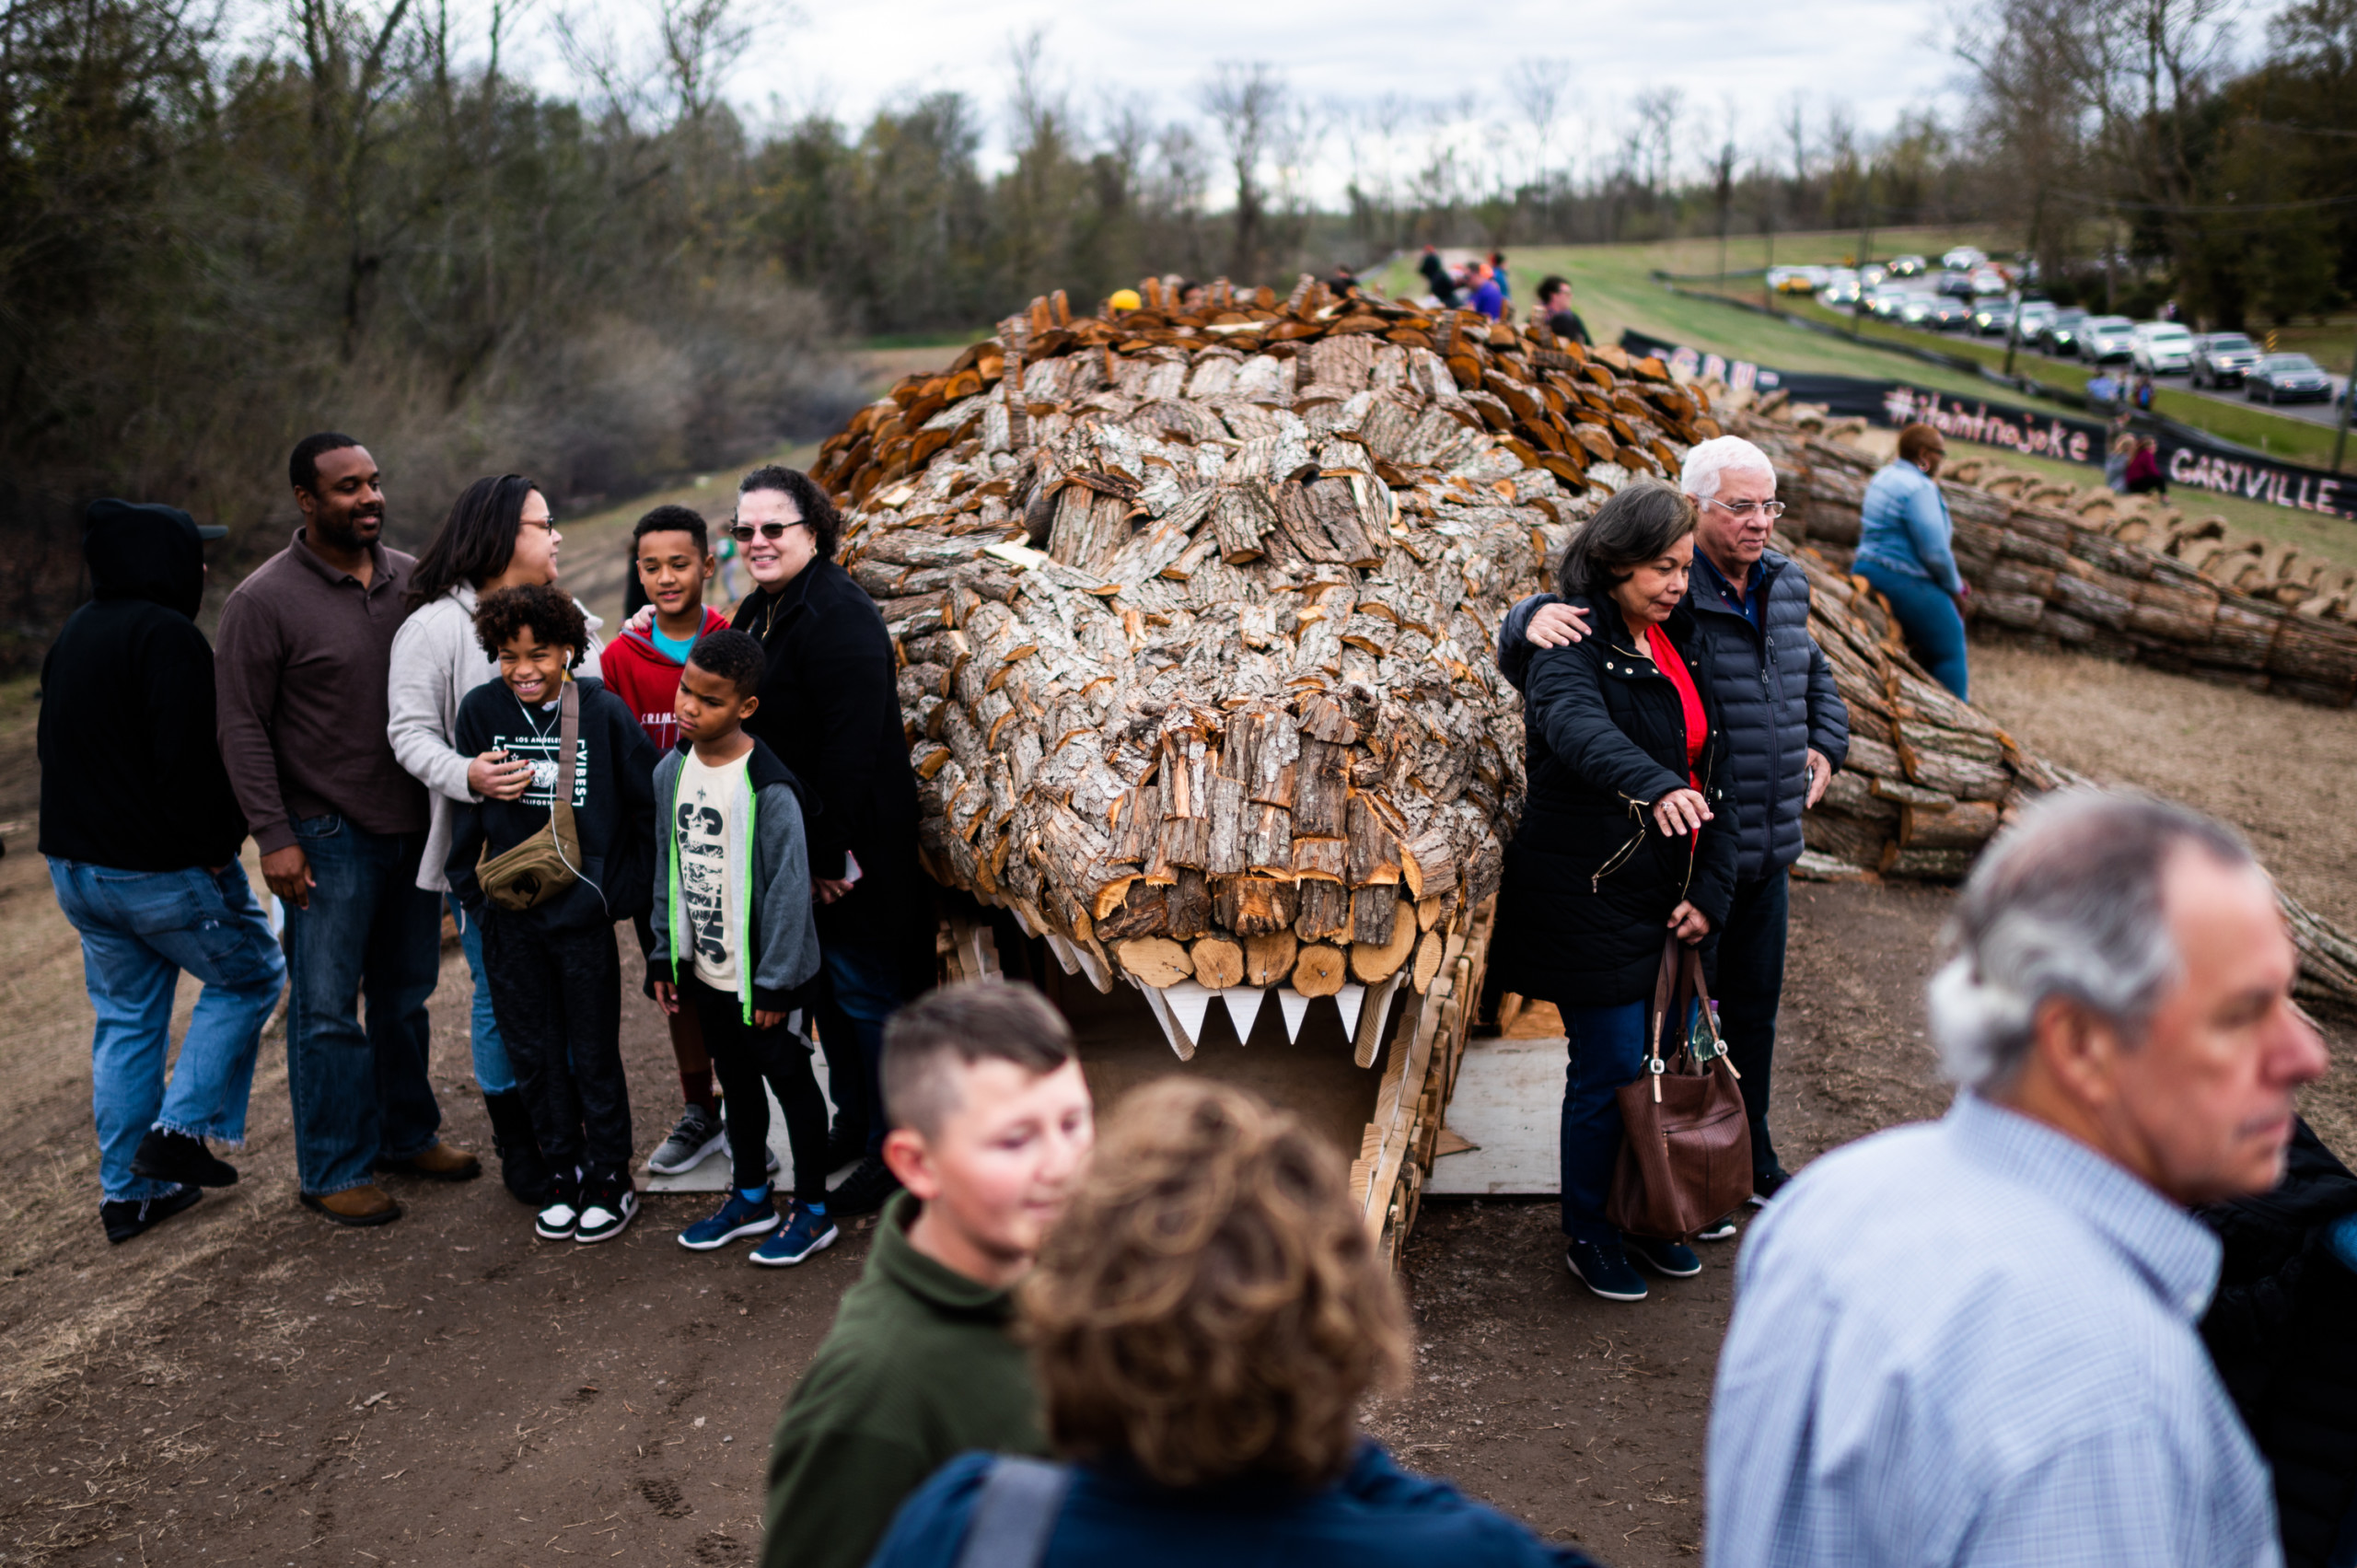 Families gathered for photos in front a 78-foot wooden sculpture of an alligator, part of Garyville's annual Christmas Eve bonfires